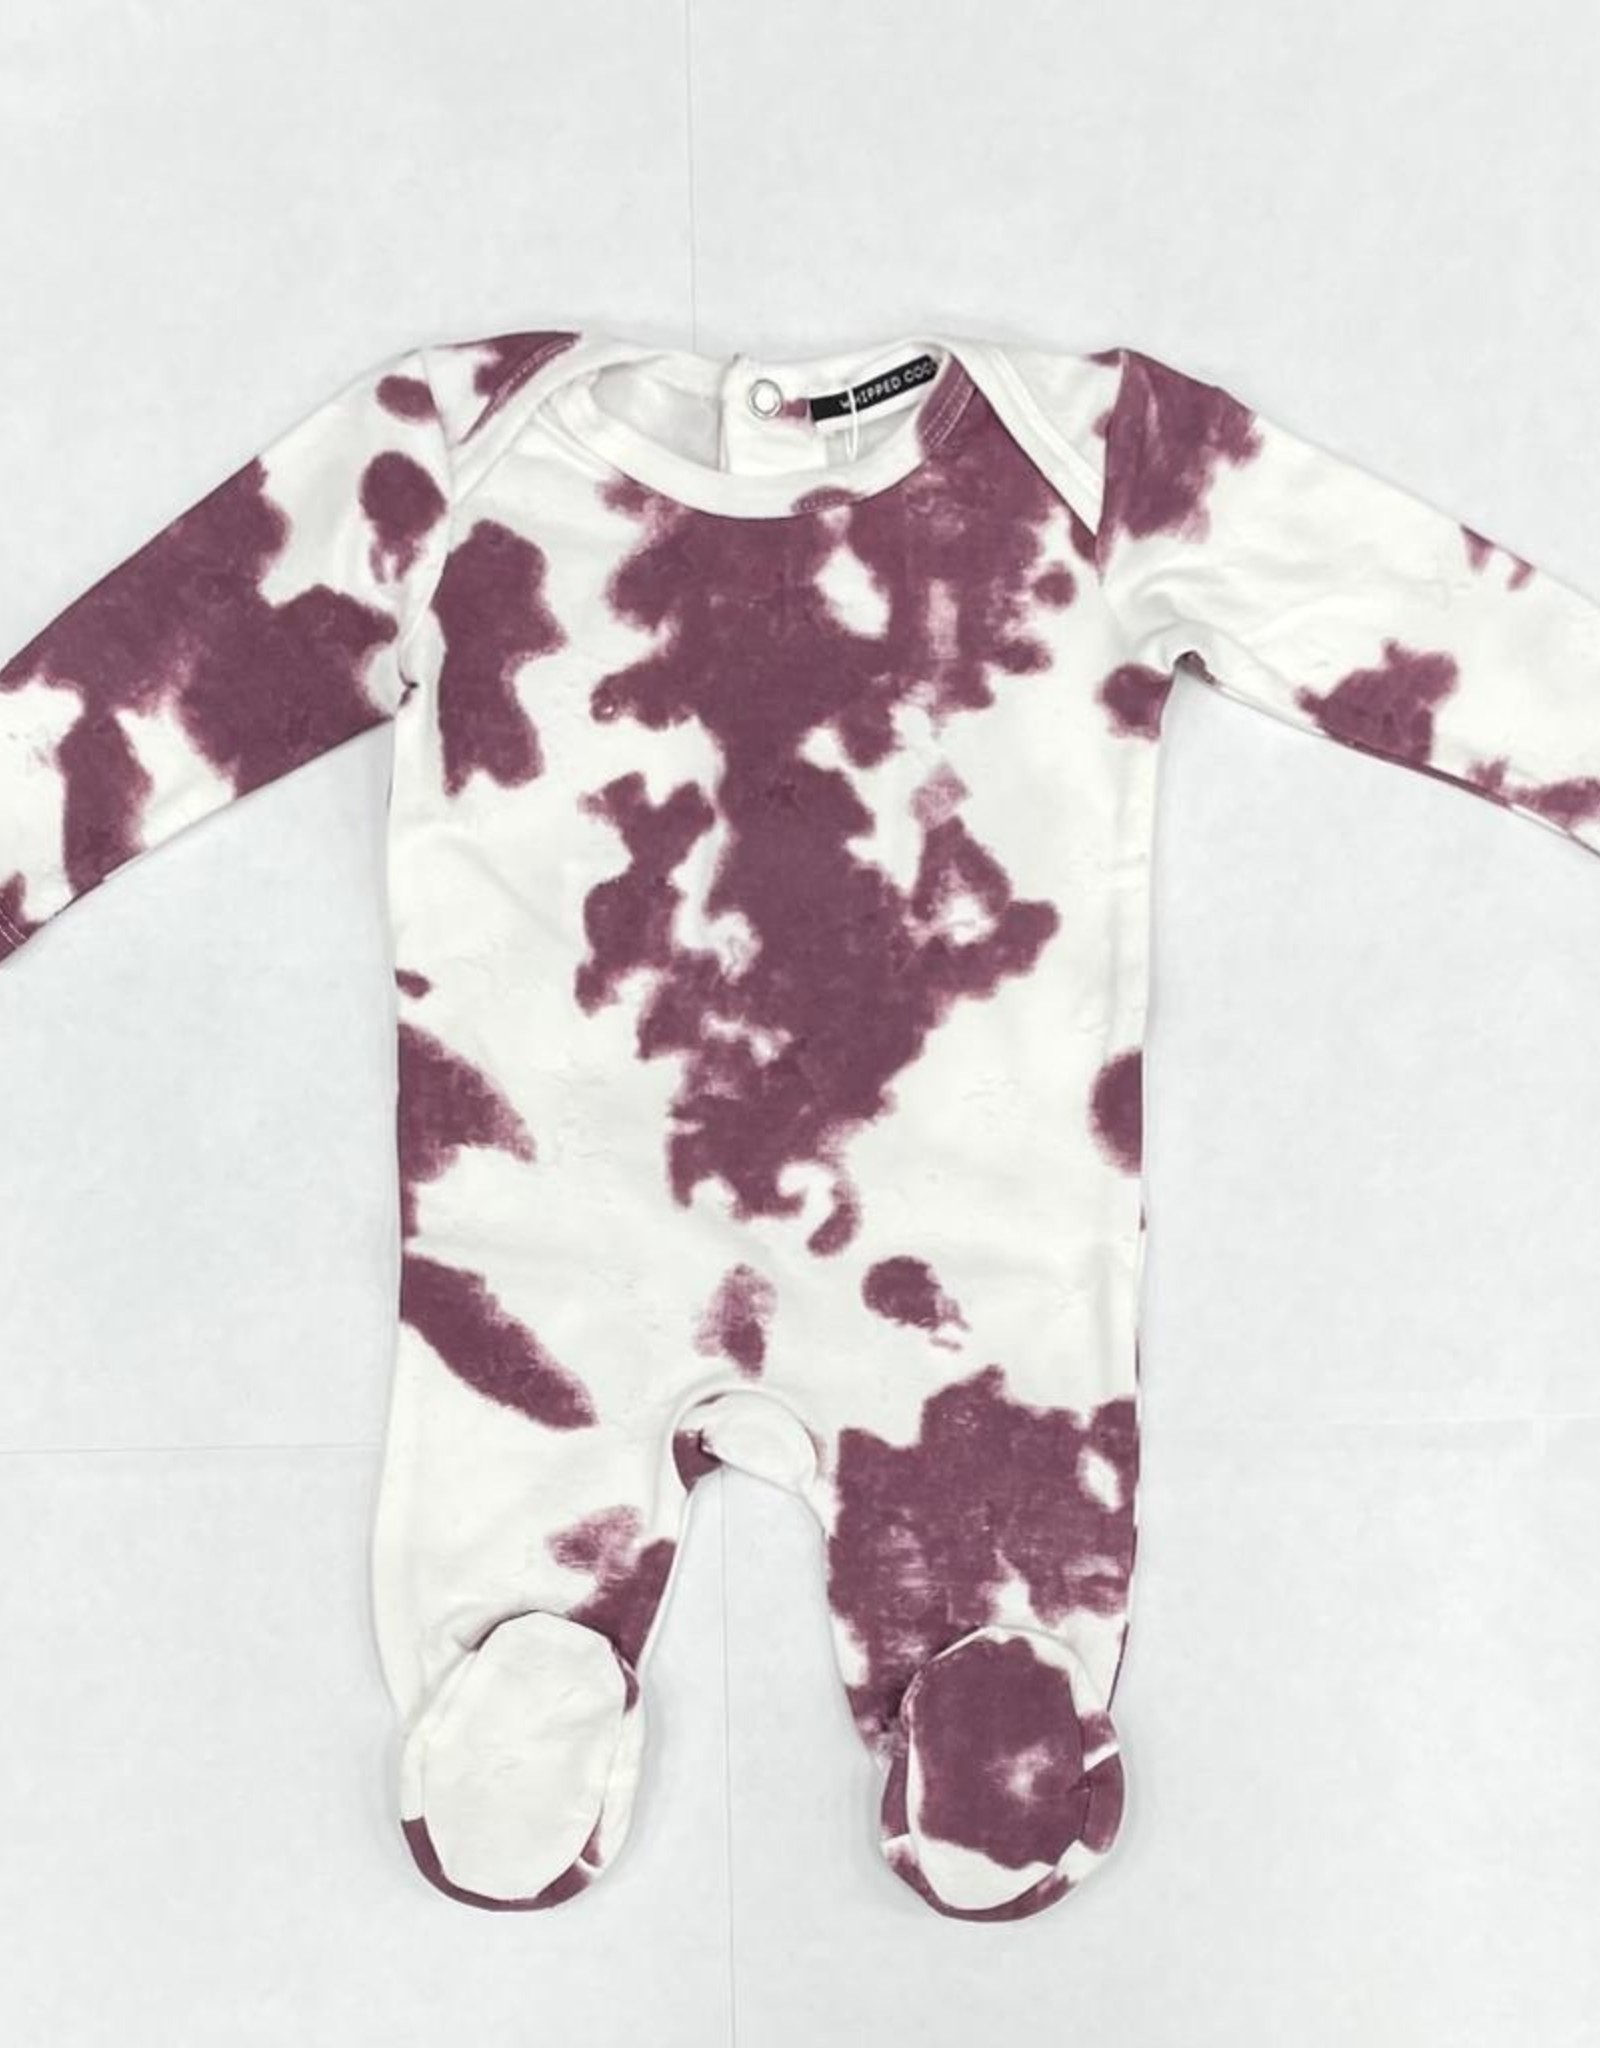 Whipped Cocoa Whipped Cocoa TieDye Star Footie Pajama